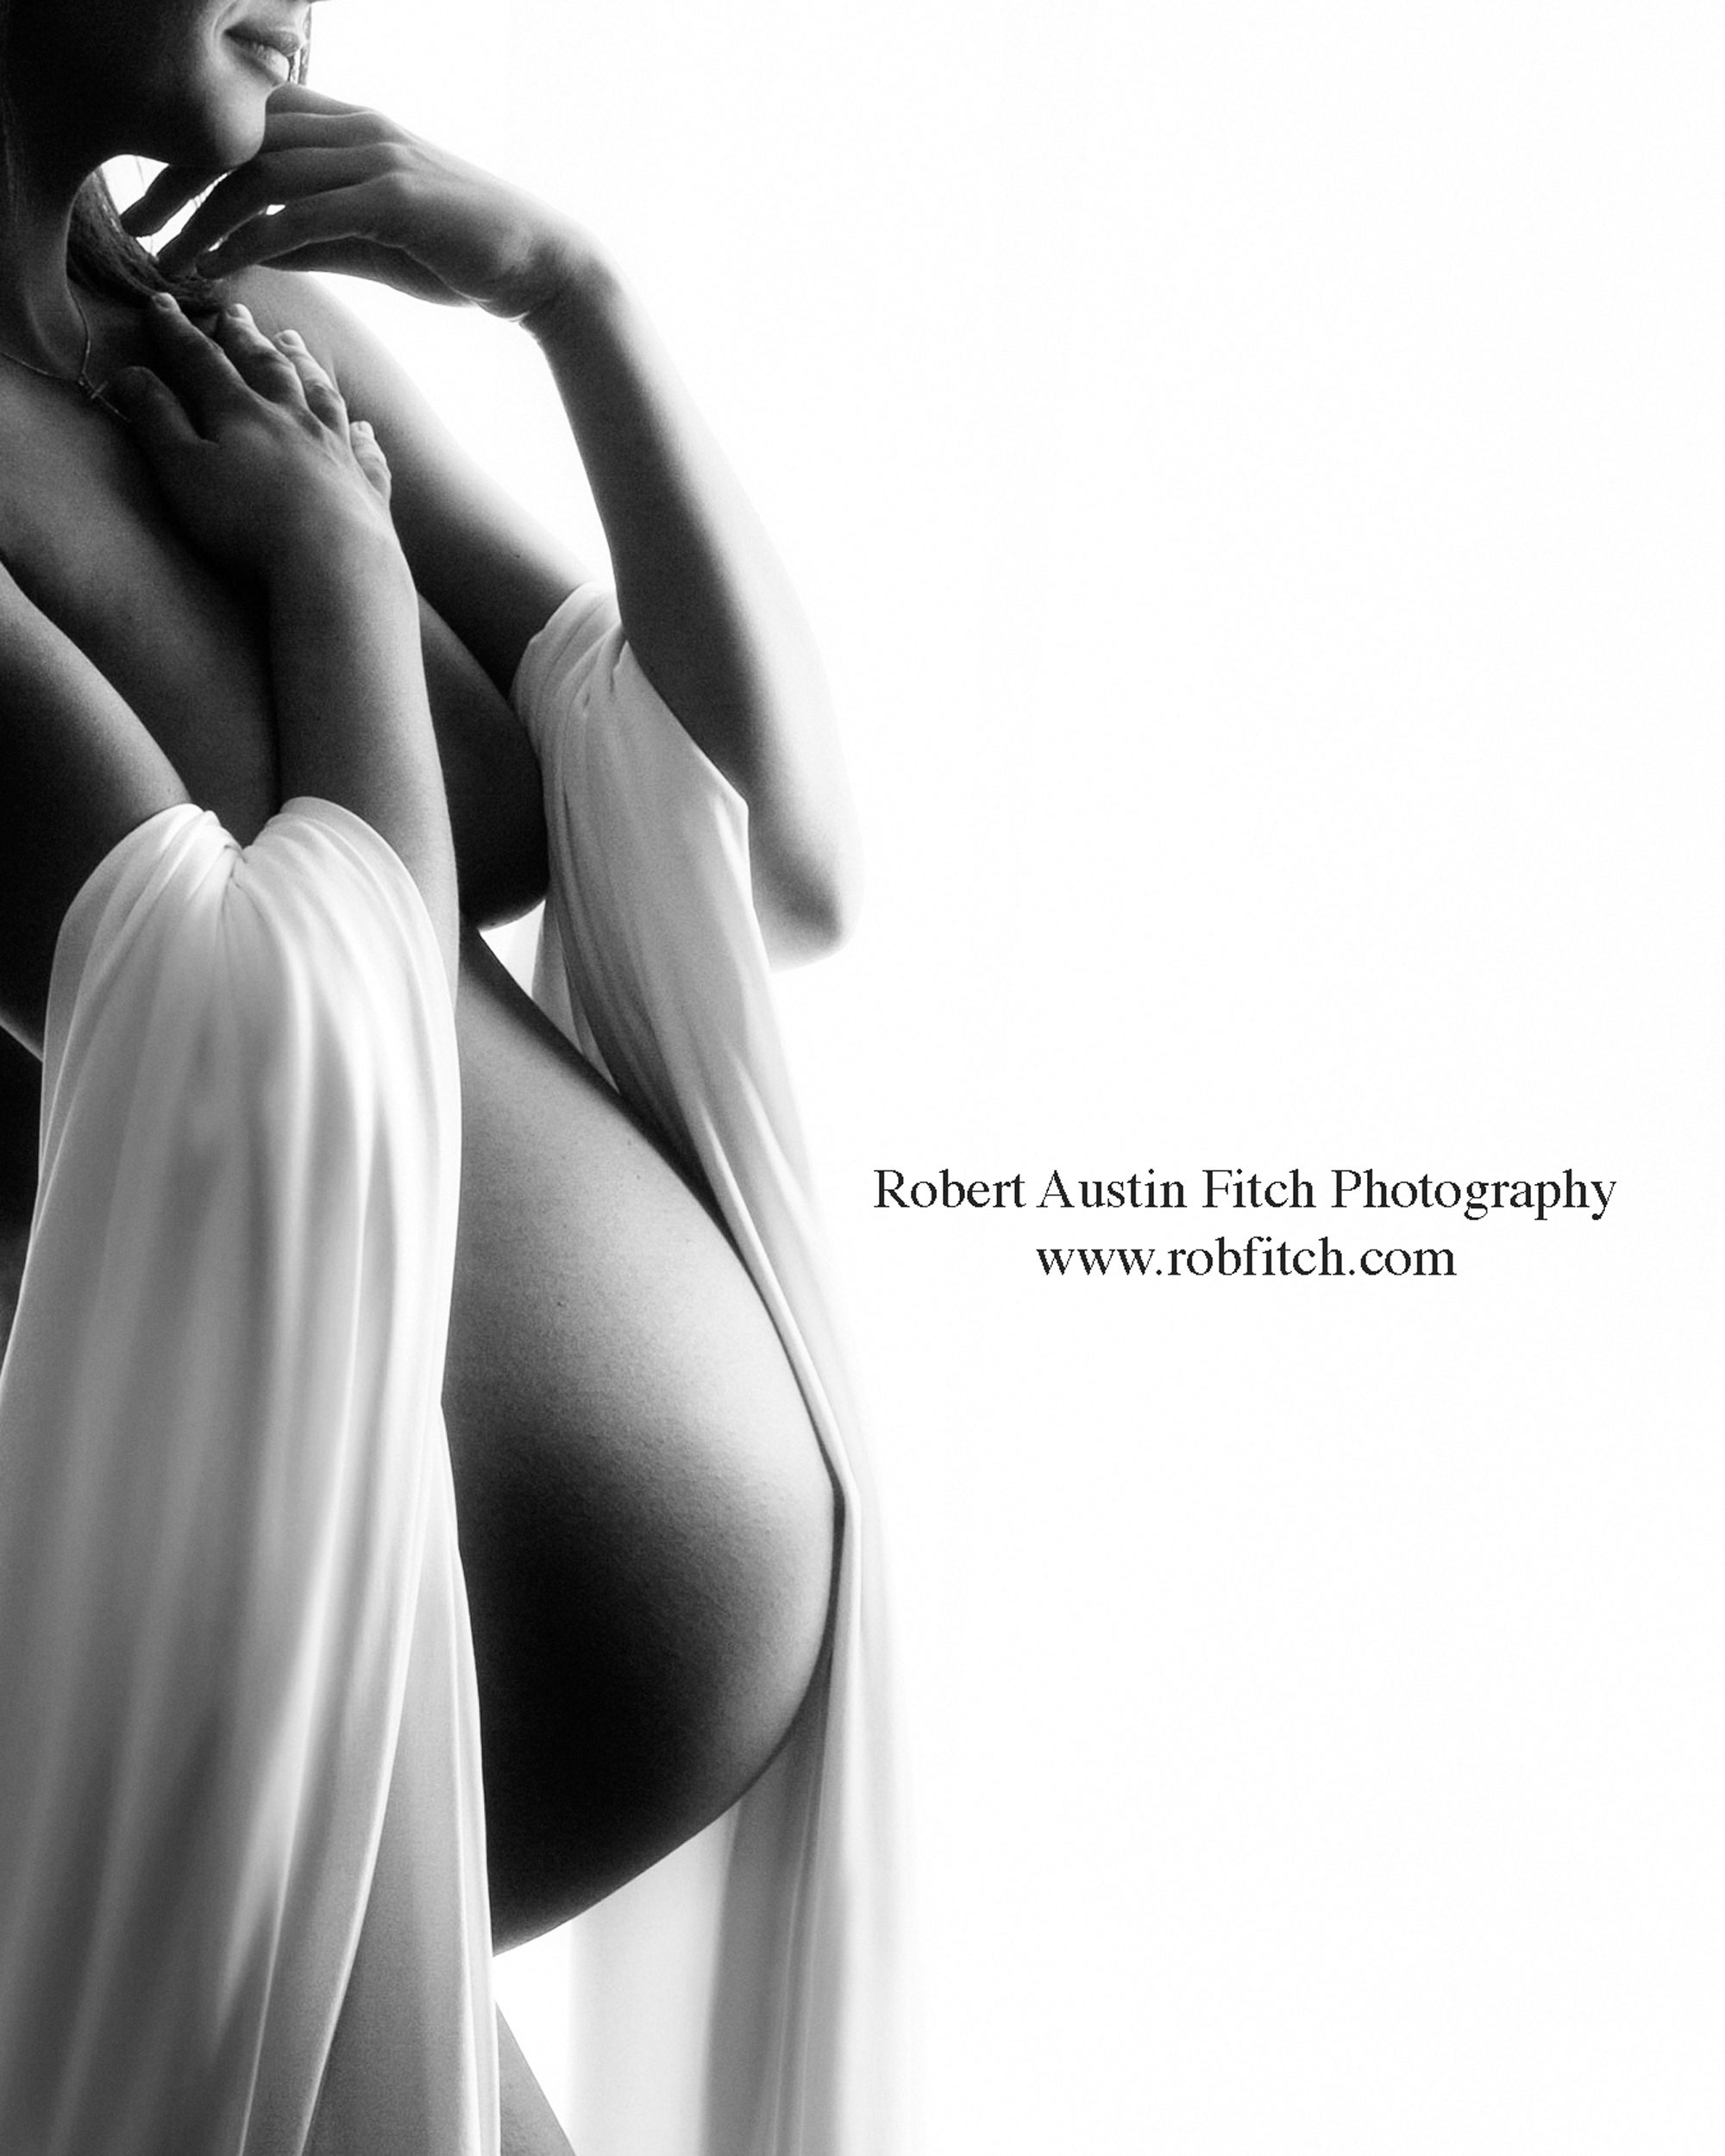 Artistic B&W silhouette maternity photograph of pregnant woman with white fabric draping